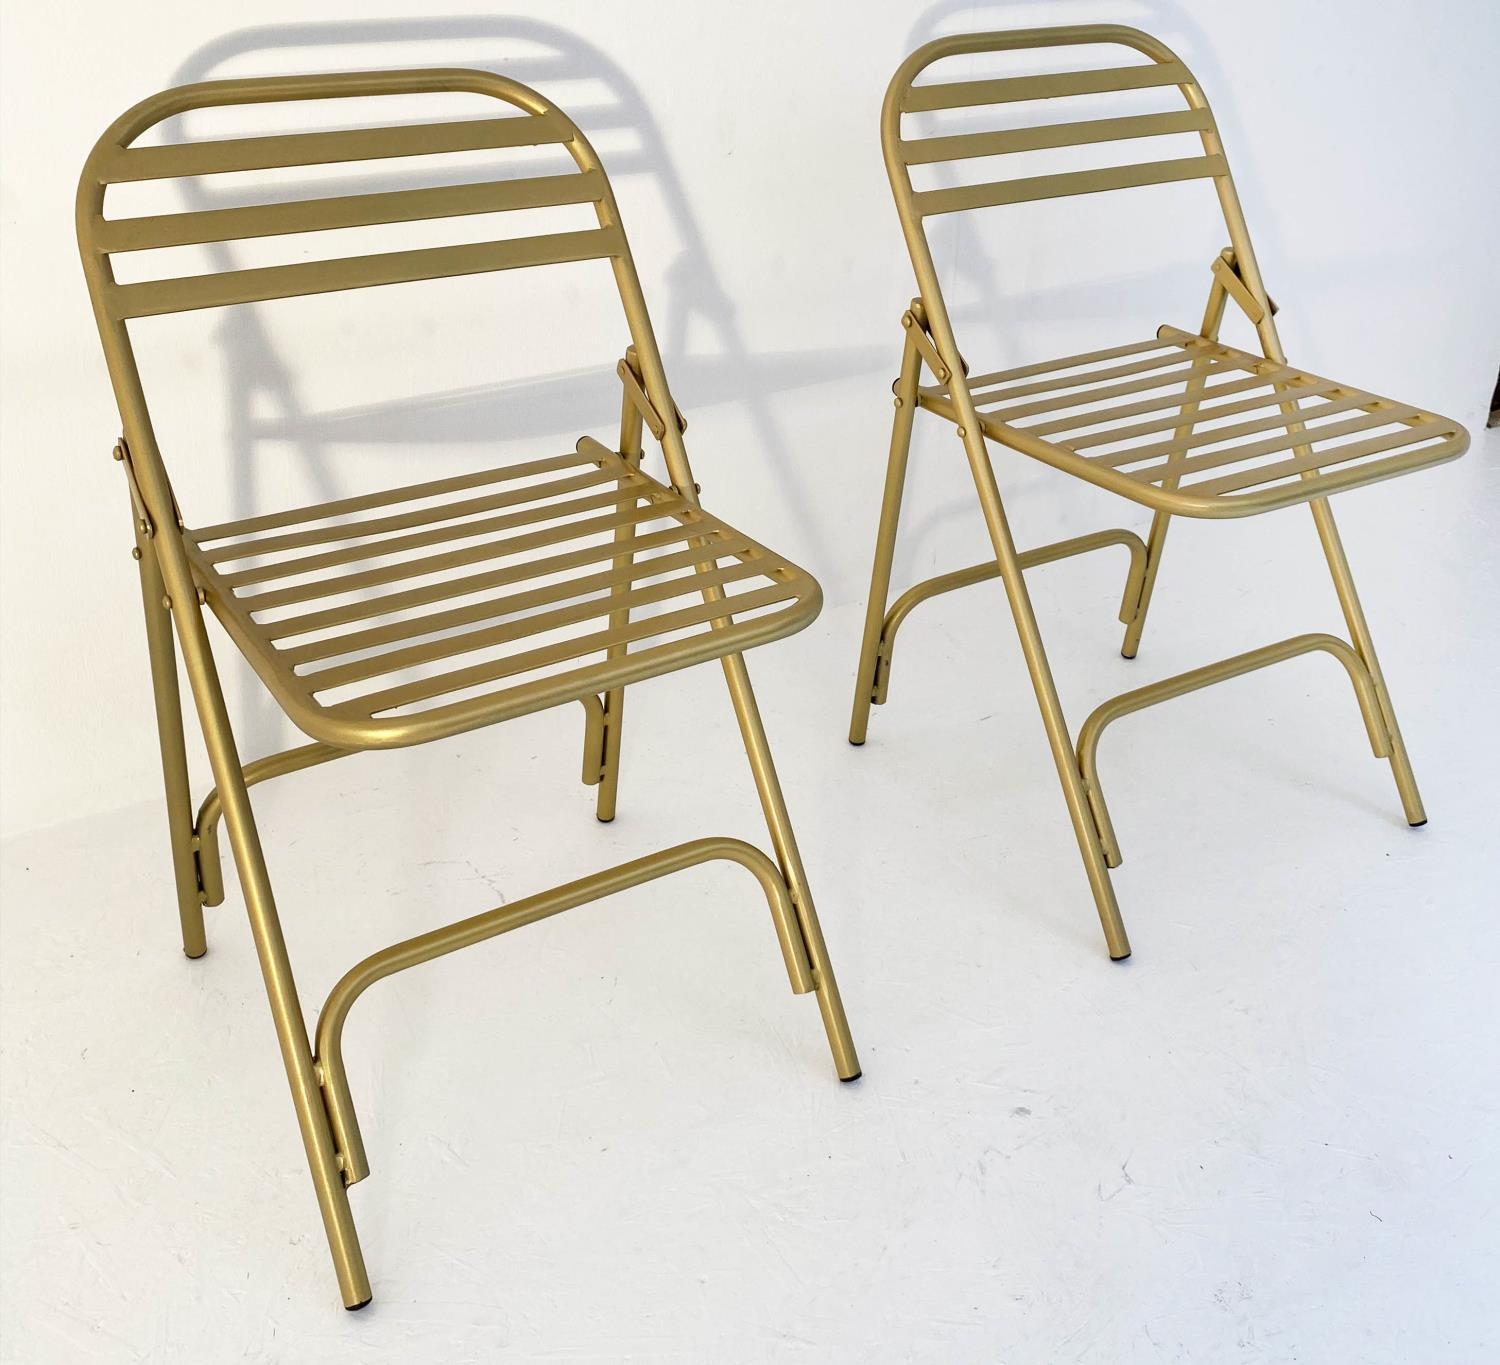 TERRACE CHAIRS, a pair, 76cm x 44cm x 45cm, 1950's French style, gilt metal. (2)